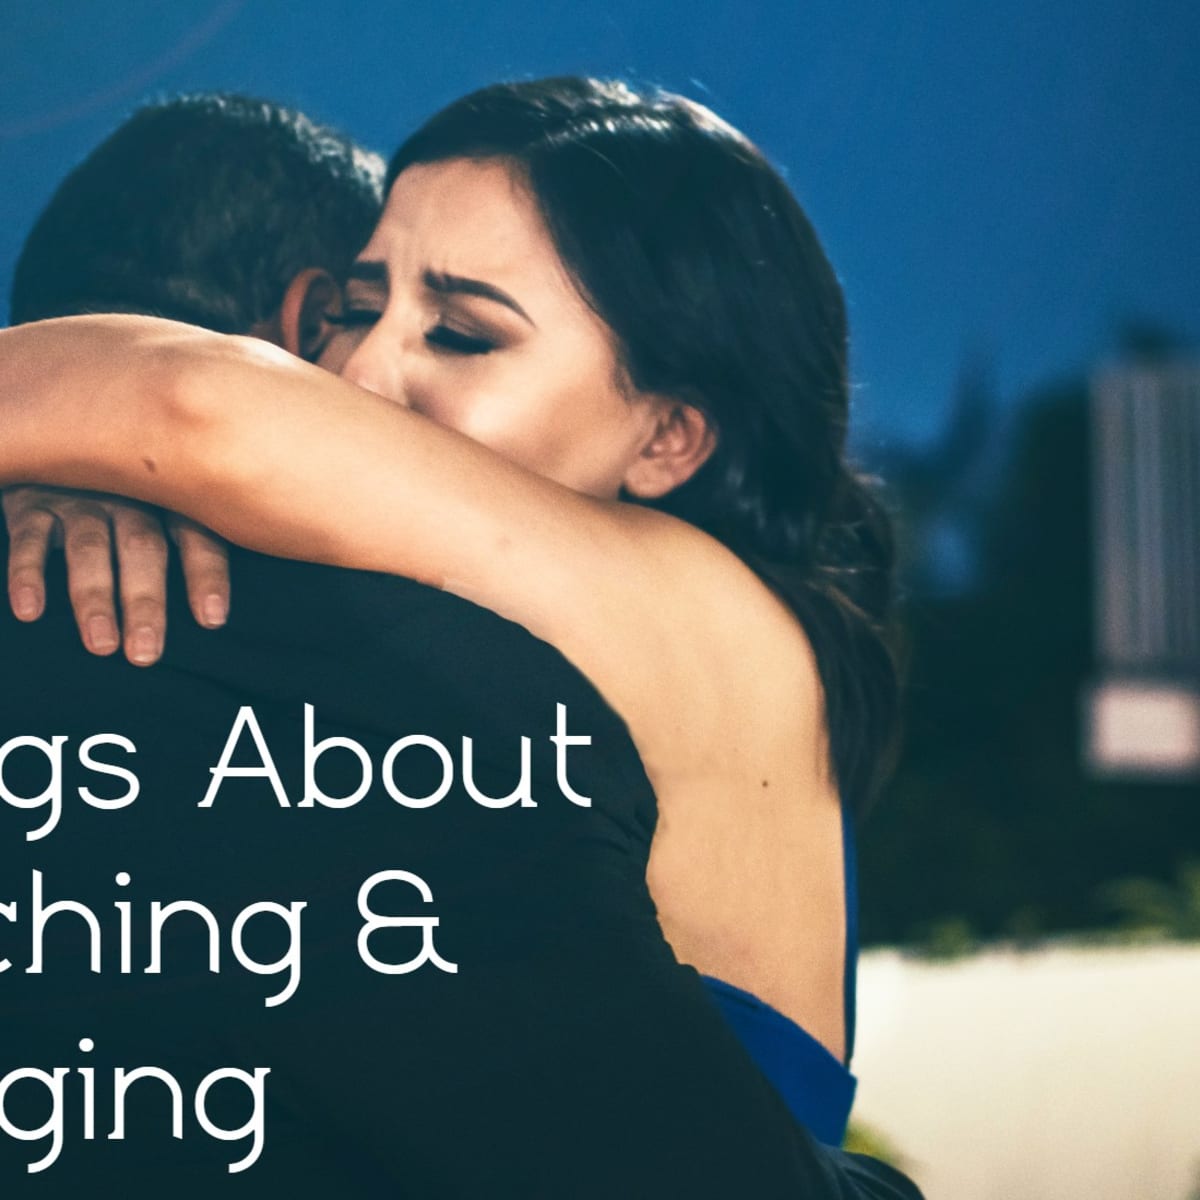 64 Songs About Touching and Hugging - Spinditty